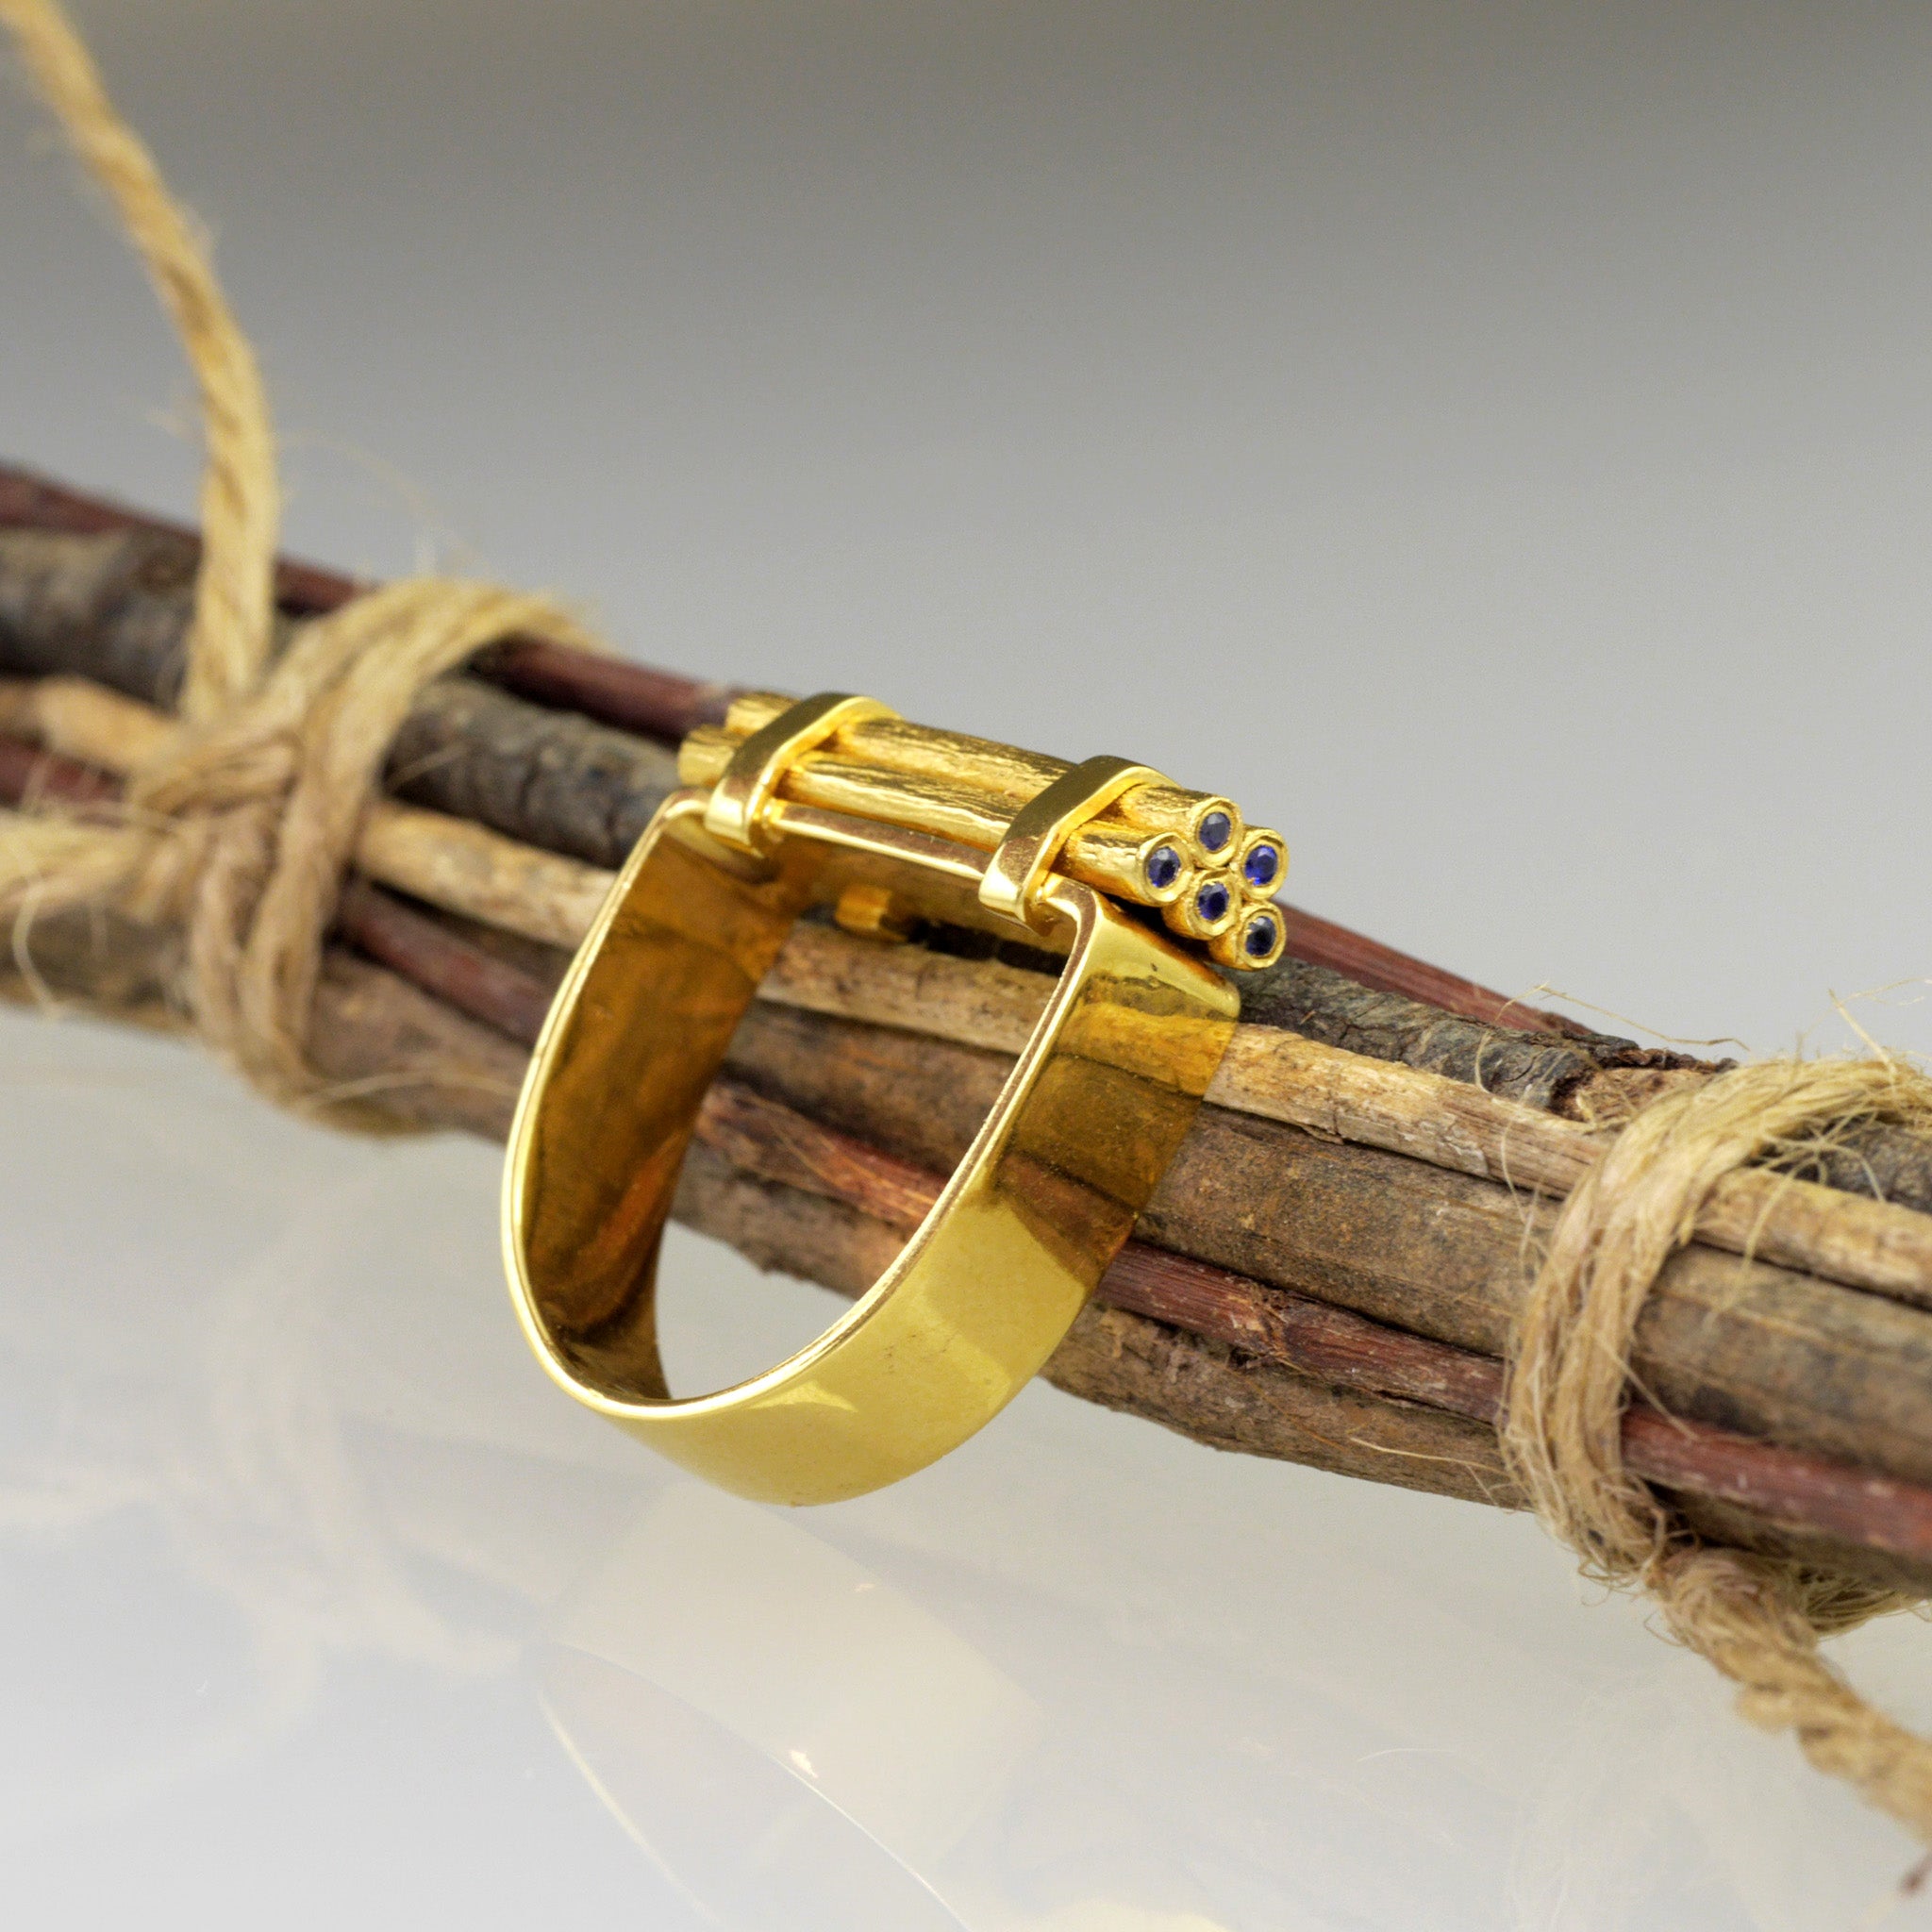 Handcrafted gold ring with stacked wood-inspired design, adorned with sparkling Sapphires for added color and radiance. the ring lies on a pile of stacked wood.